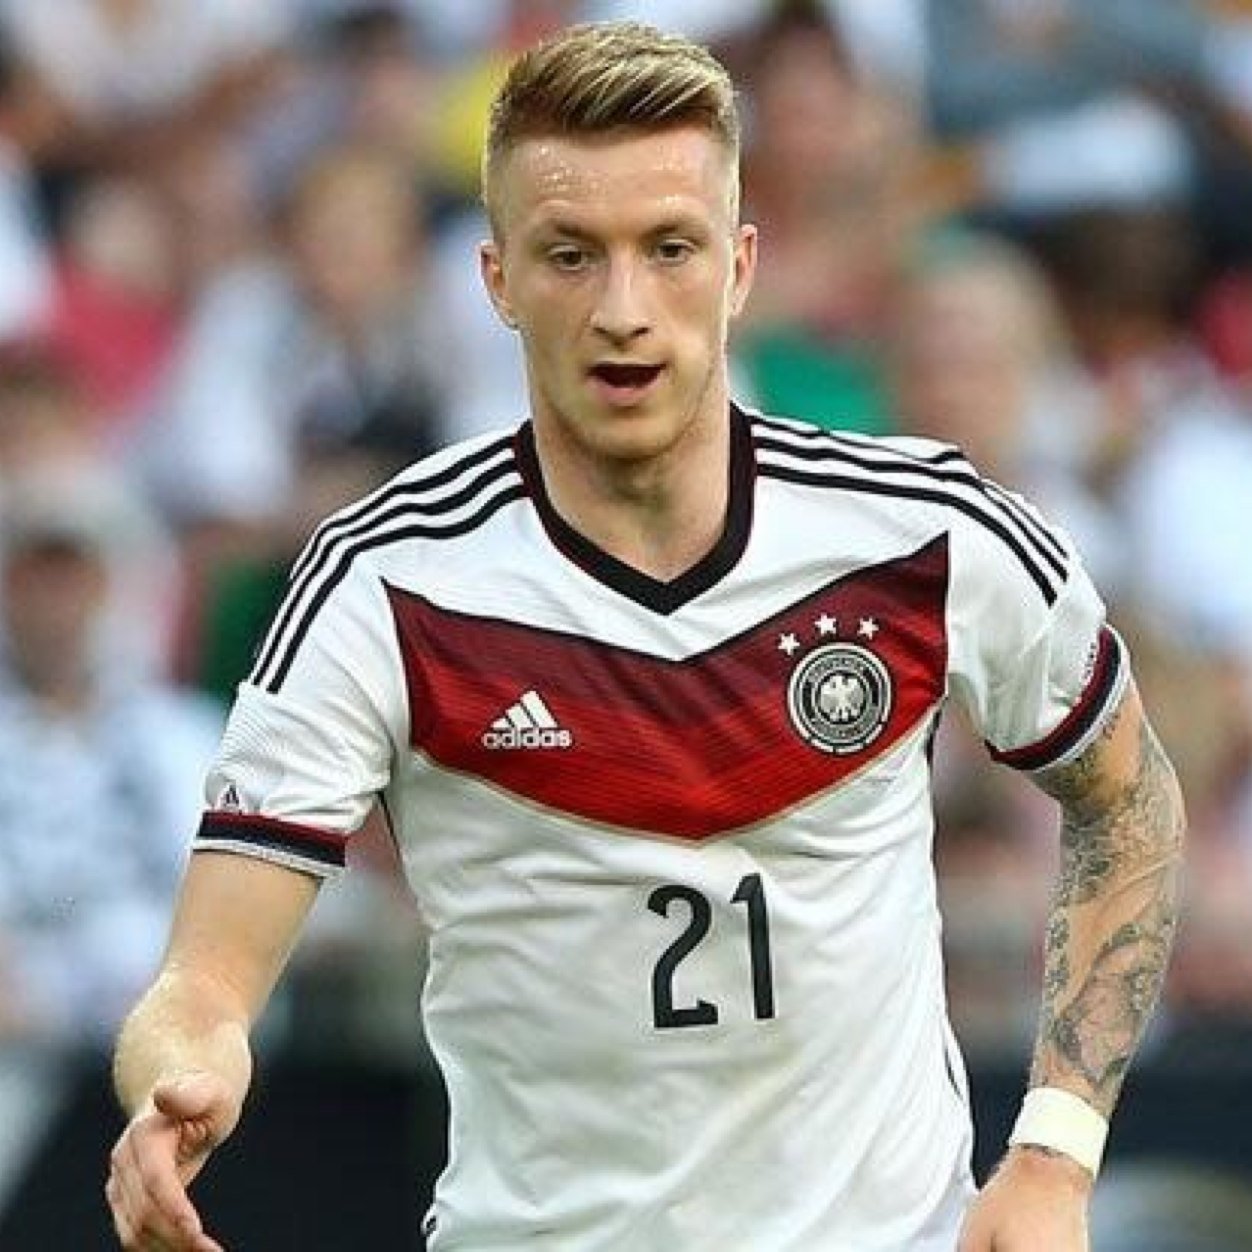 Tweeting you the latest, breaking news got to do with Borussia Dortmund and Marco Reus, the @BVB and @DFB_Team_En football star.